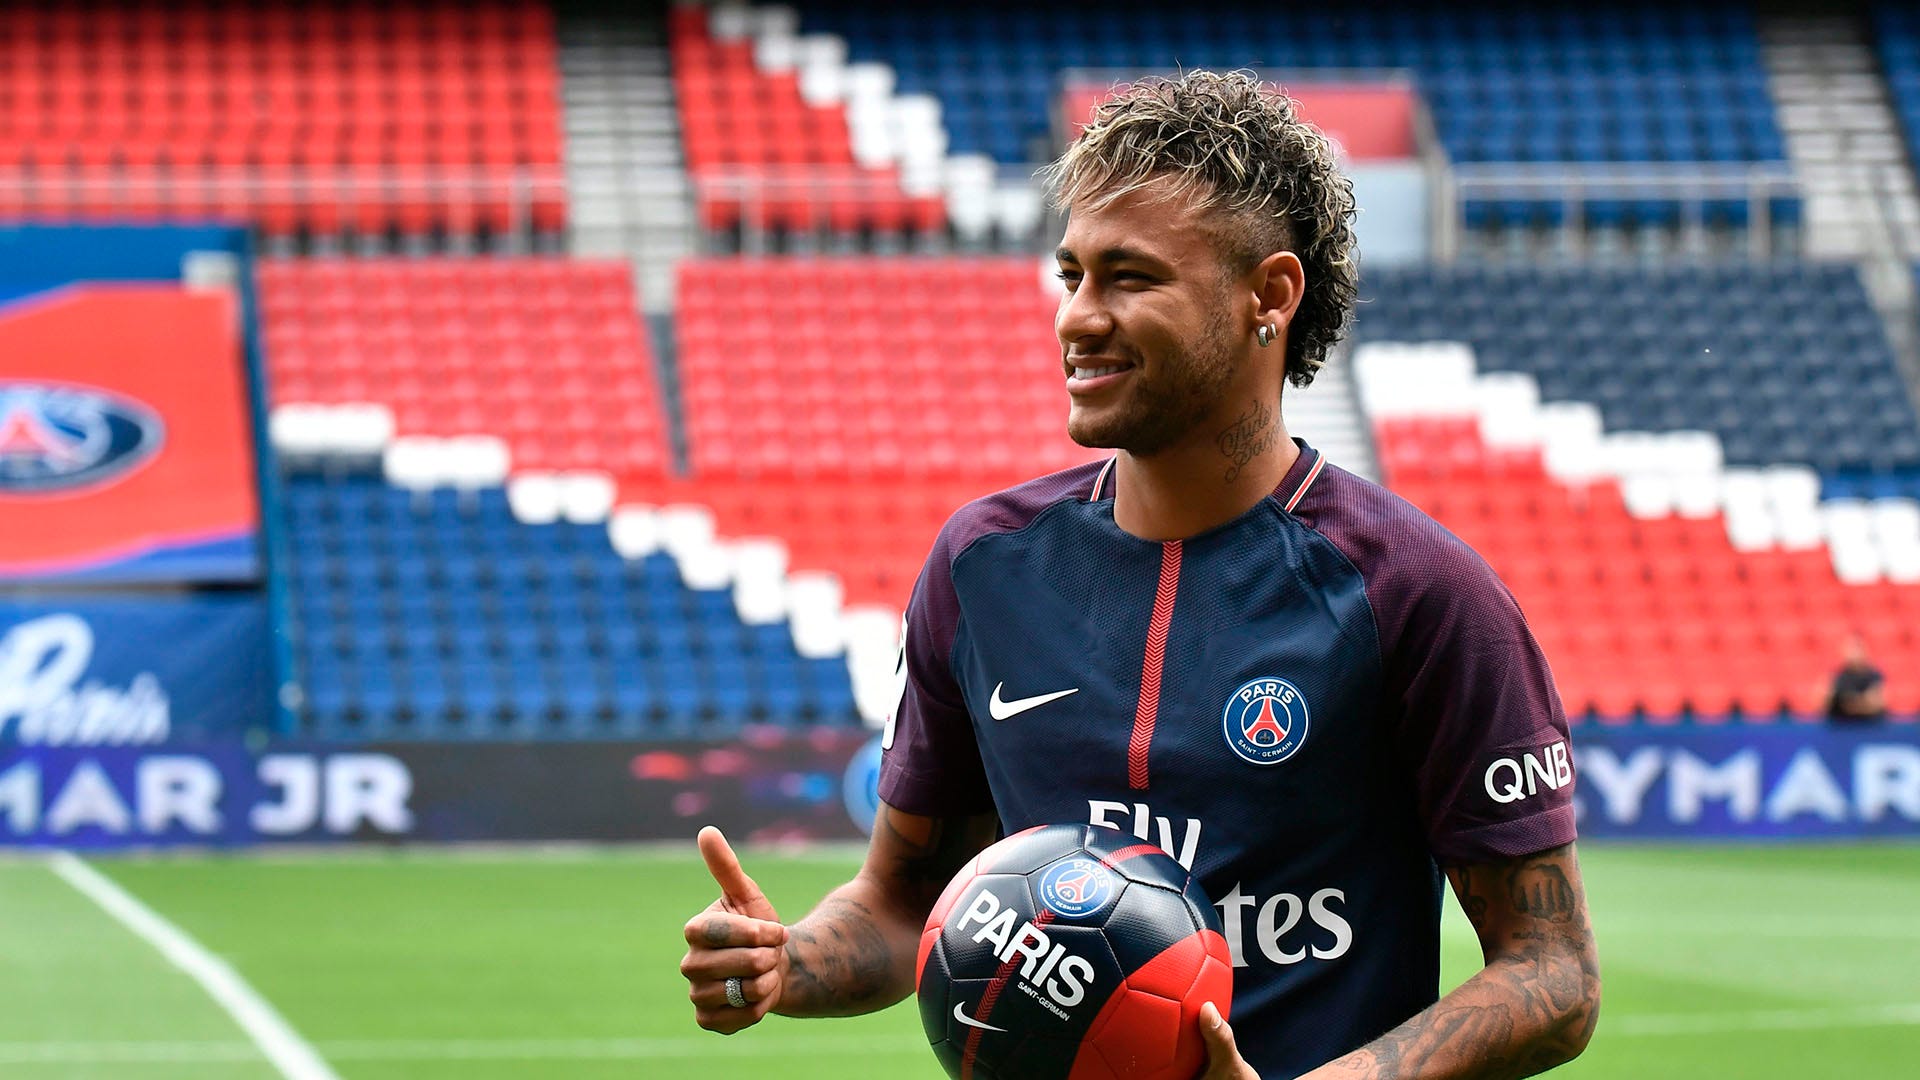 Why Neymar could end up at Real Madrid one day